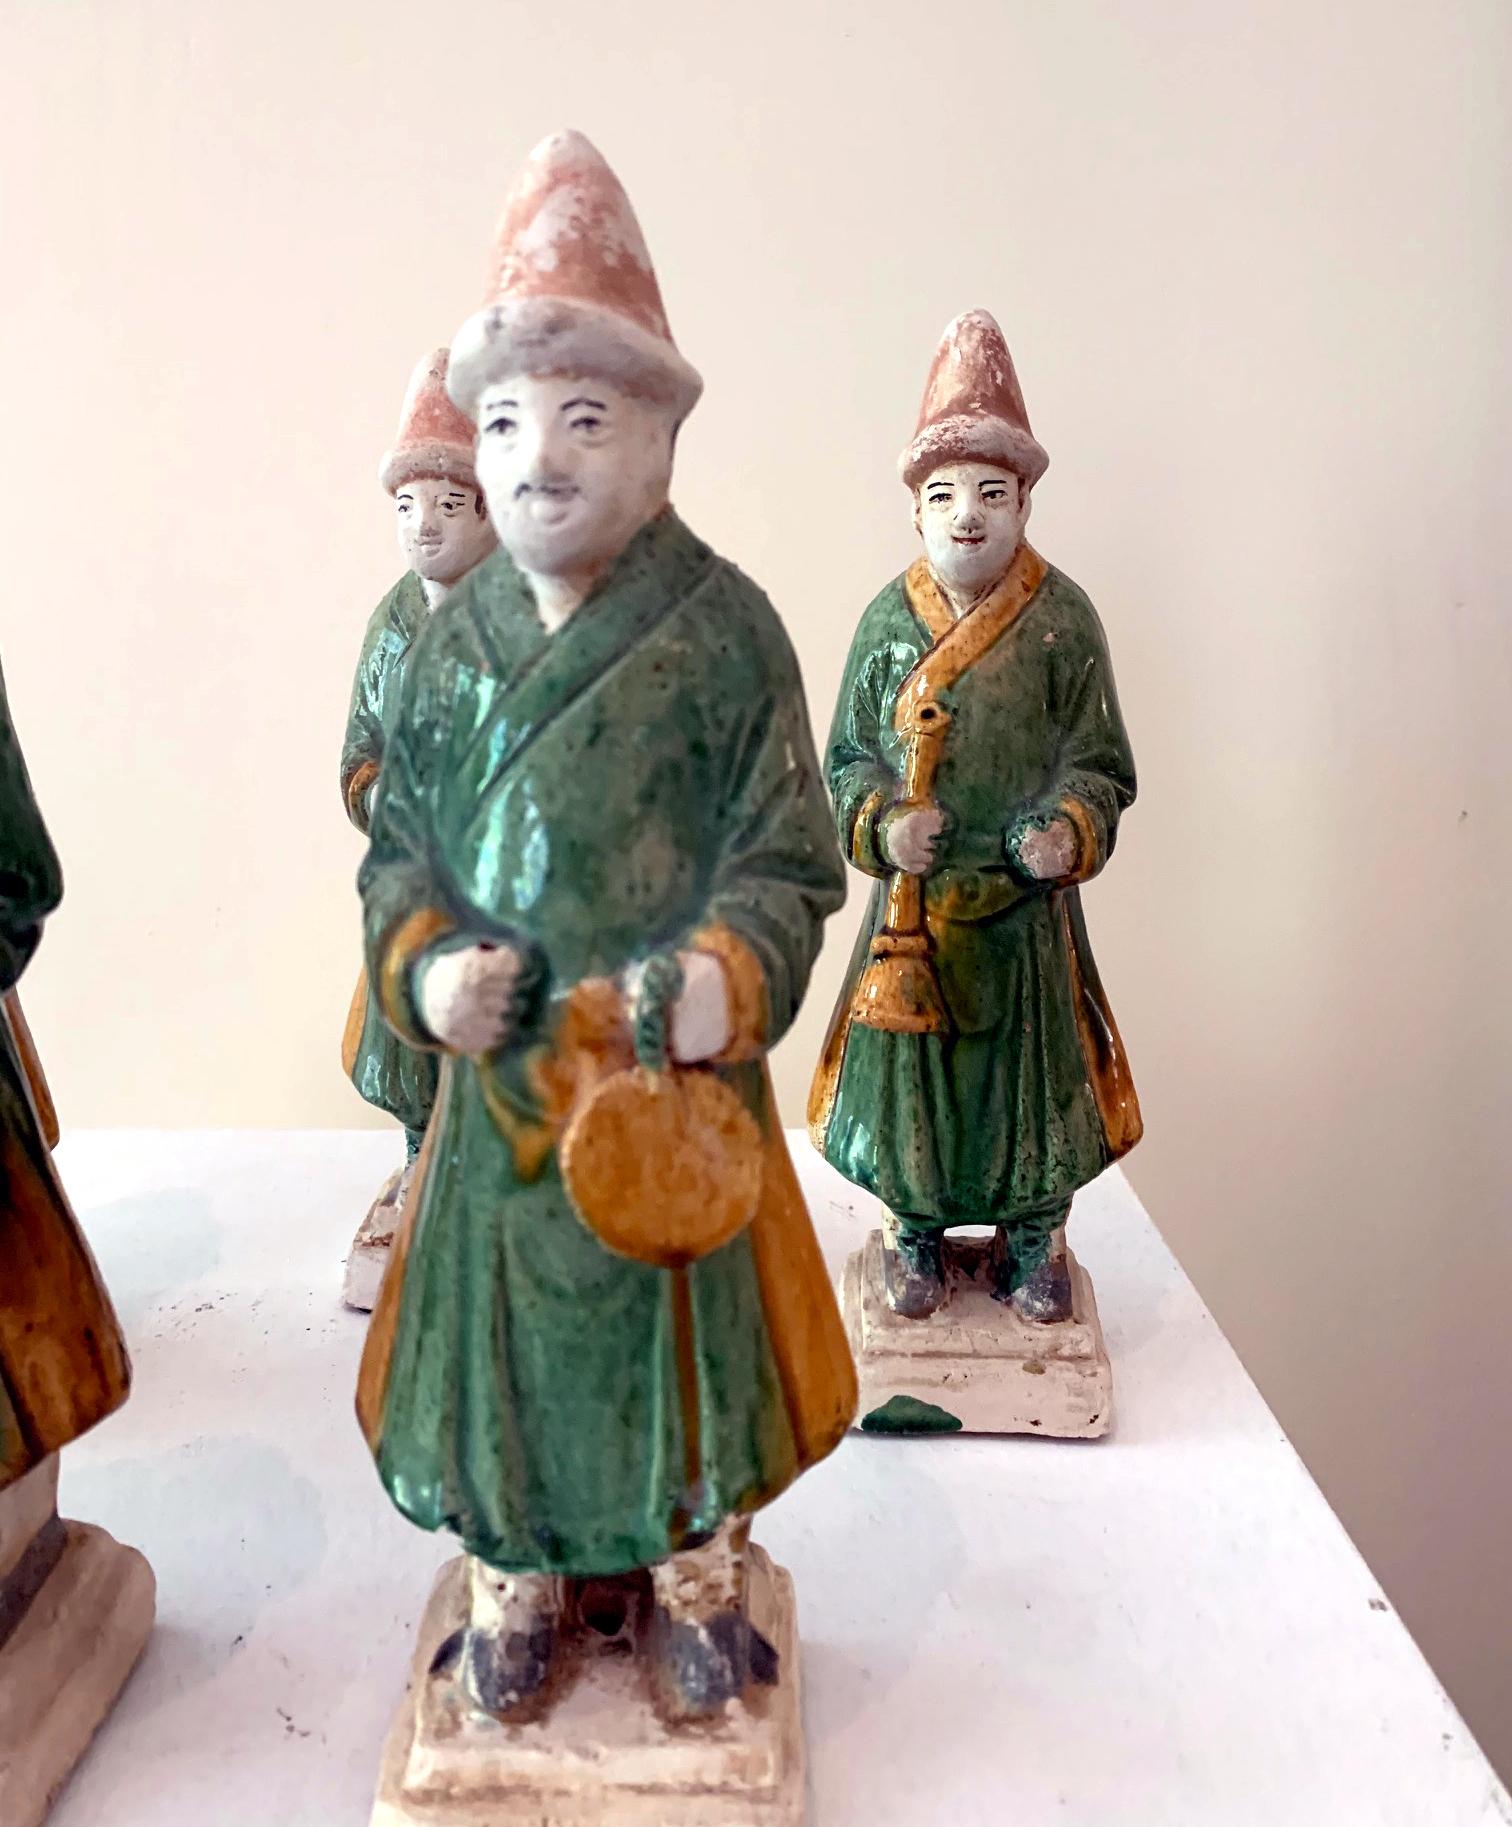 CHINESE Musicians Terracota Tomb Statues Ancient Asian Art Dollhouse Miniatures 